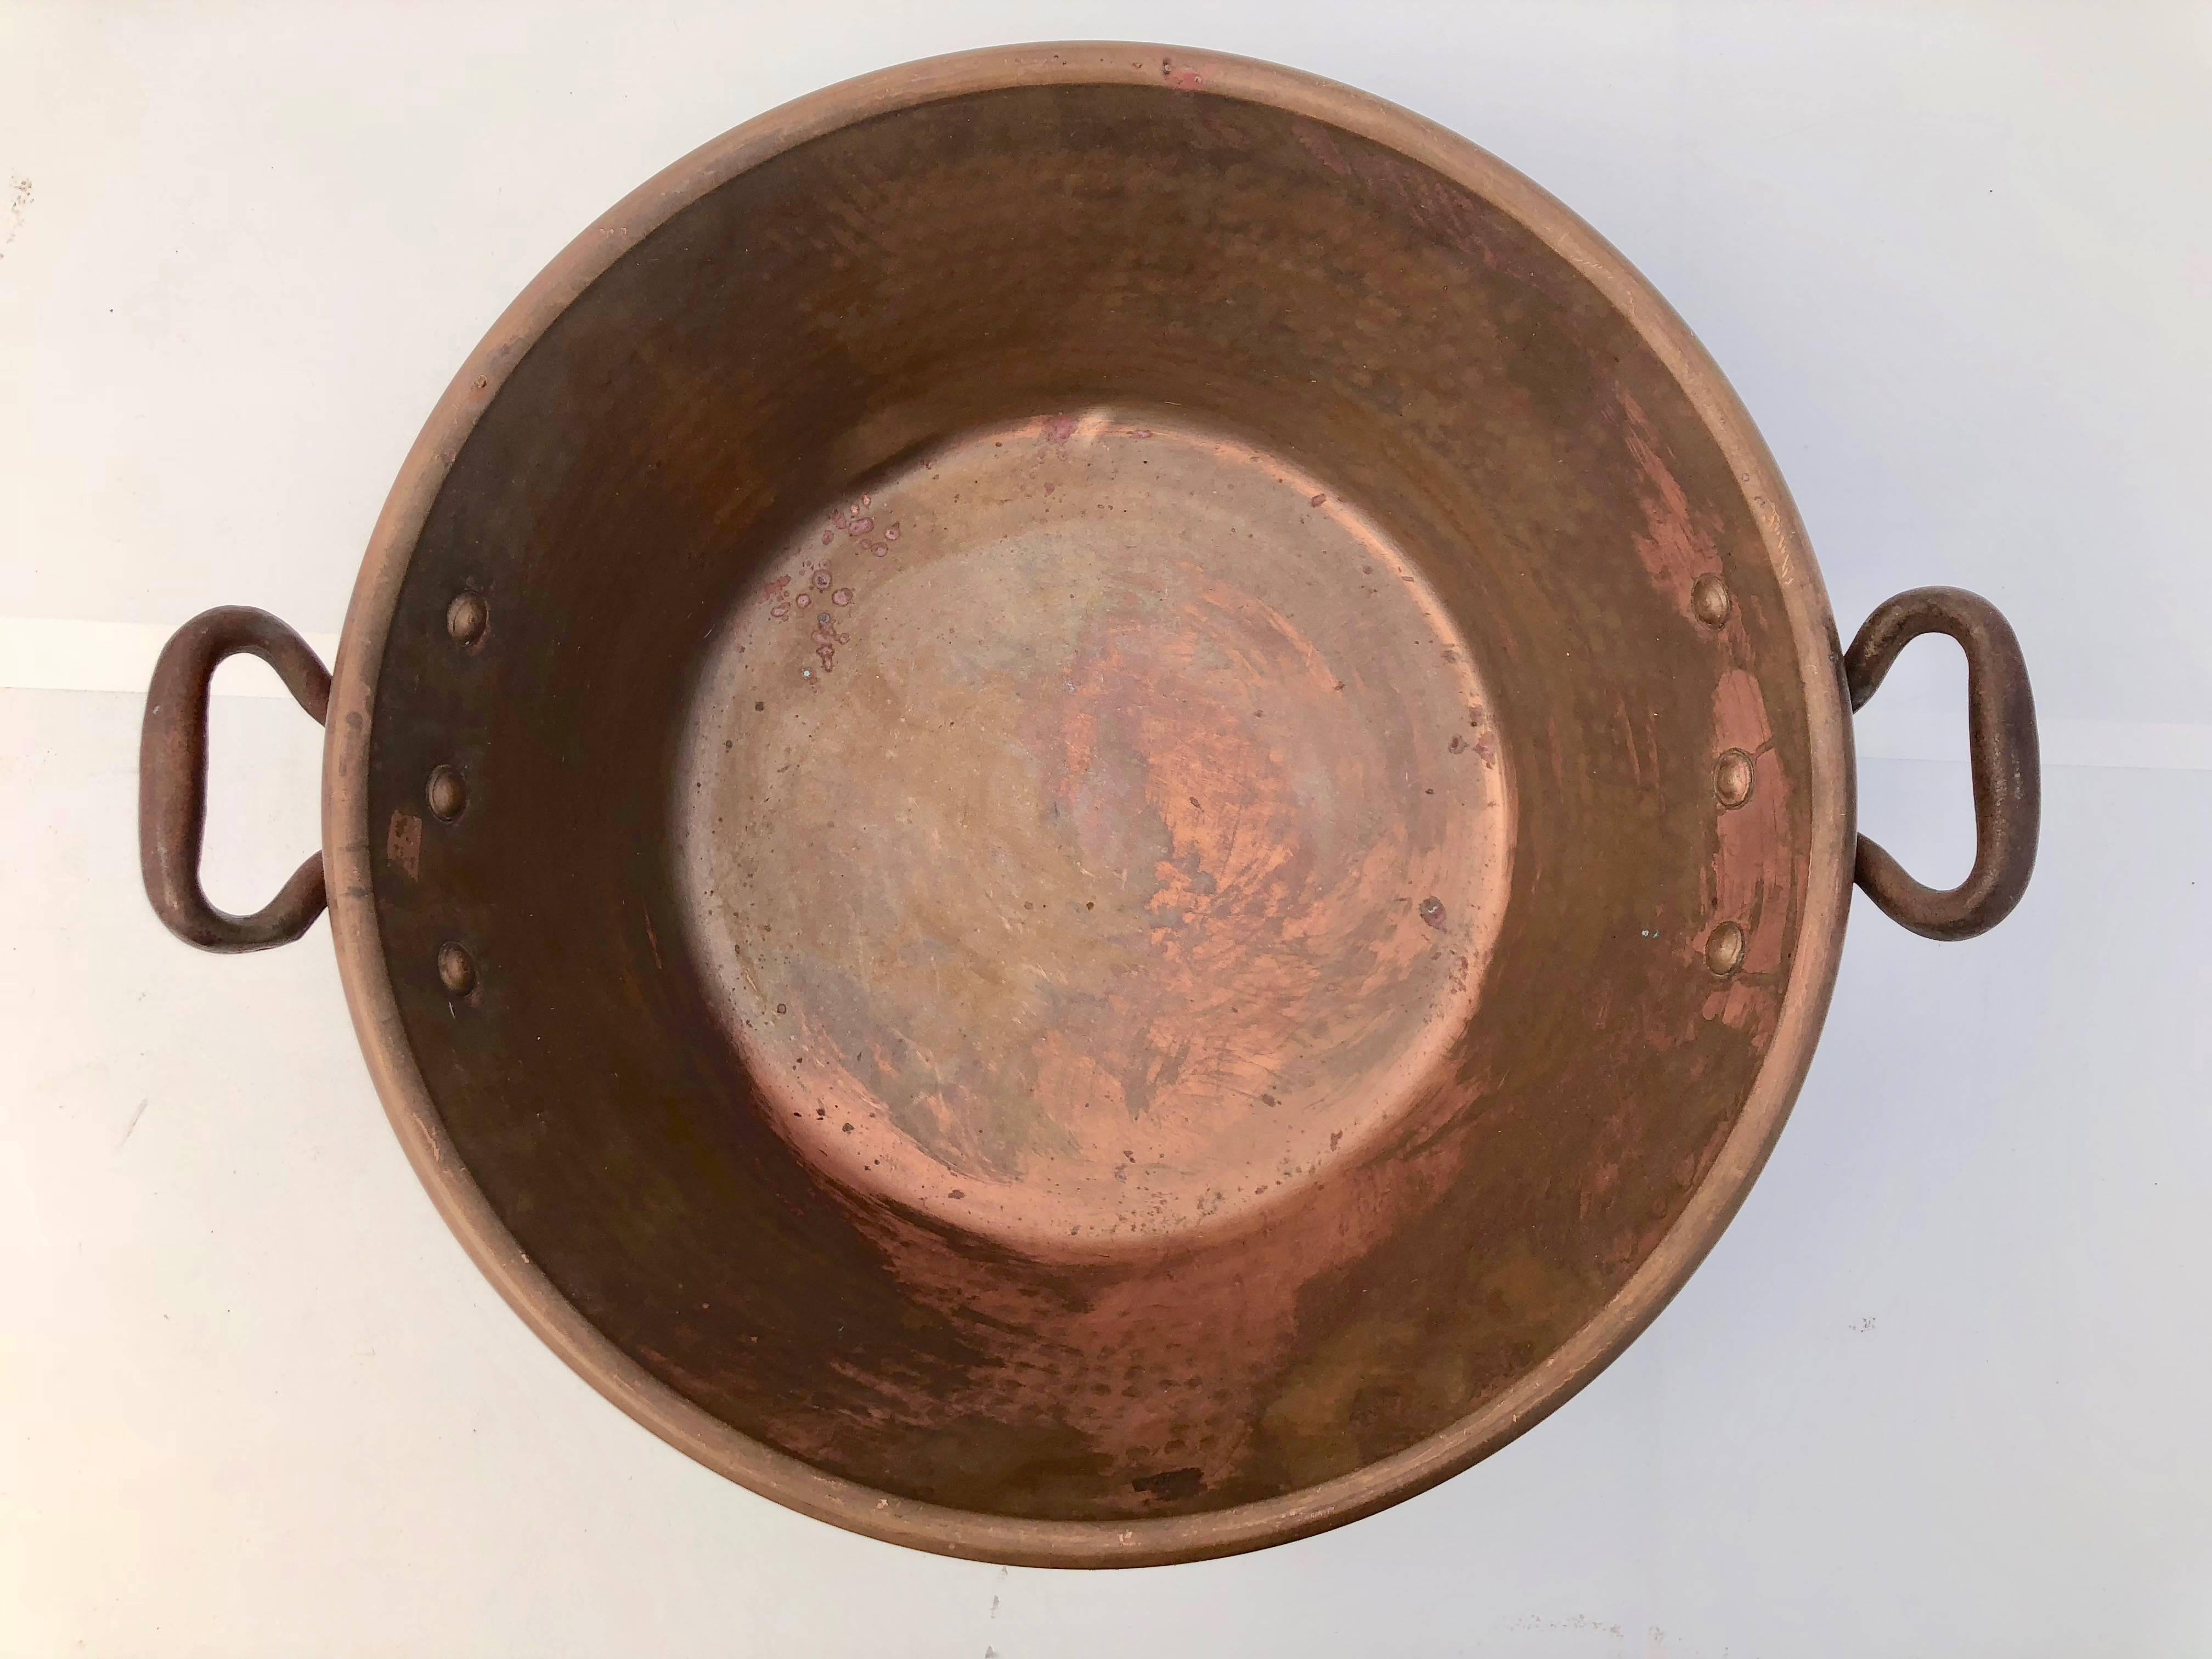 This French antique copper preserving pan with wrought iron handles was used to bake jam or other sweet food in the 1800s. The three reasons why these copper pans work so well is that it- evenly spreads the heat and, since most fruit contain pectin